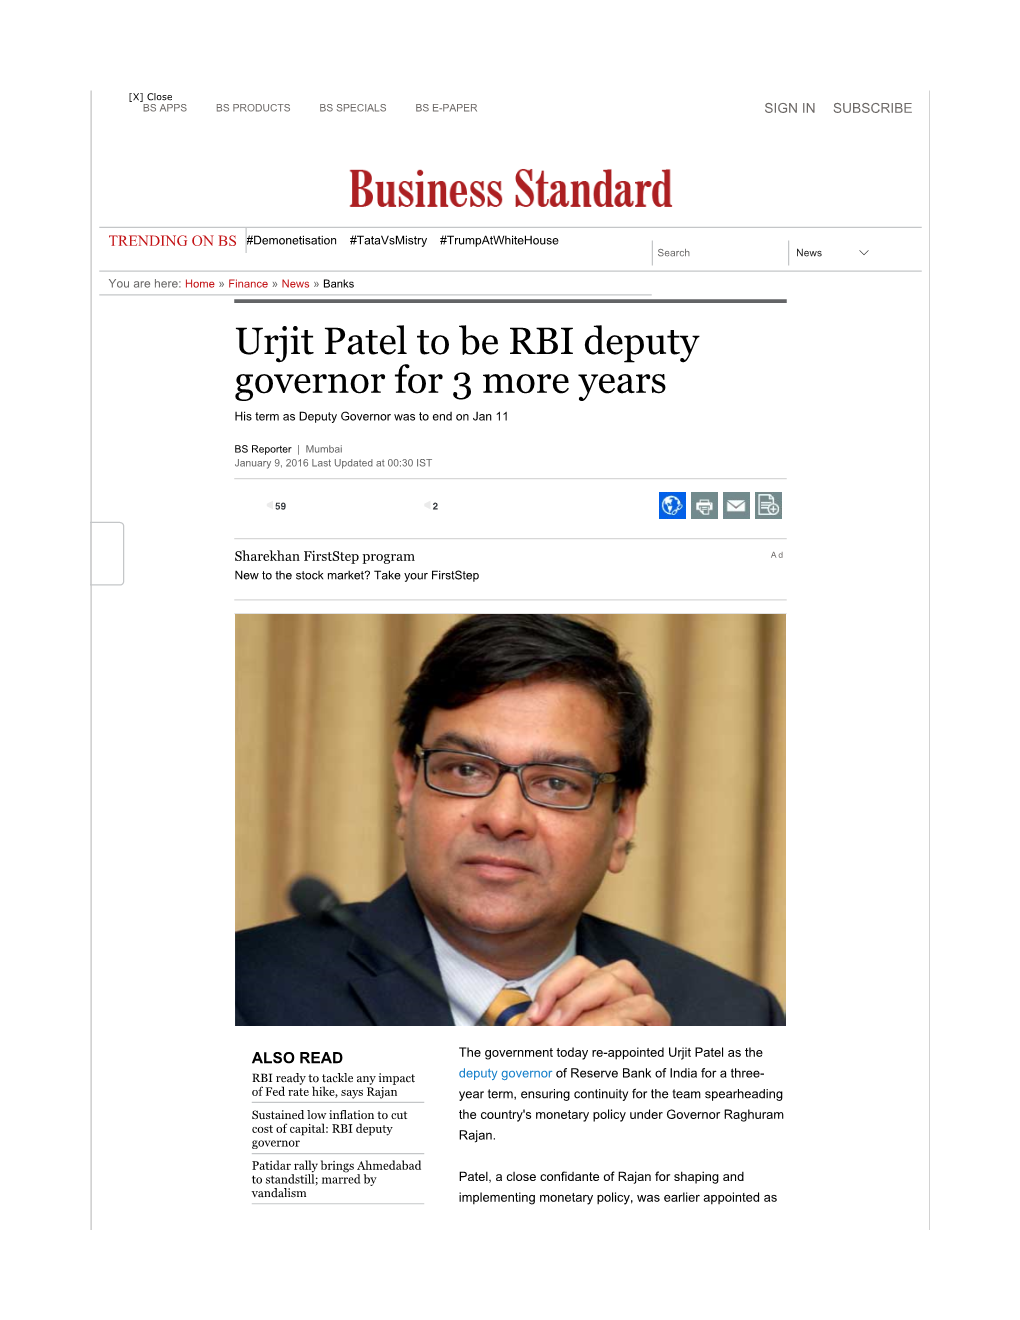 Urjit Patel to Be RBI Deputy Governor for 3 More Years | Busine